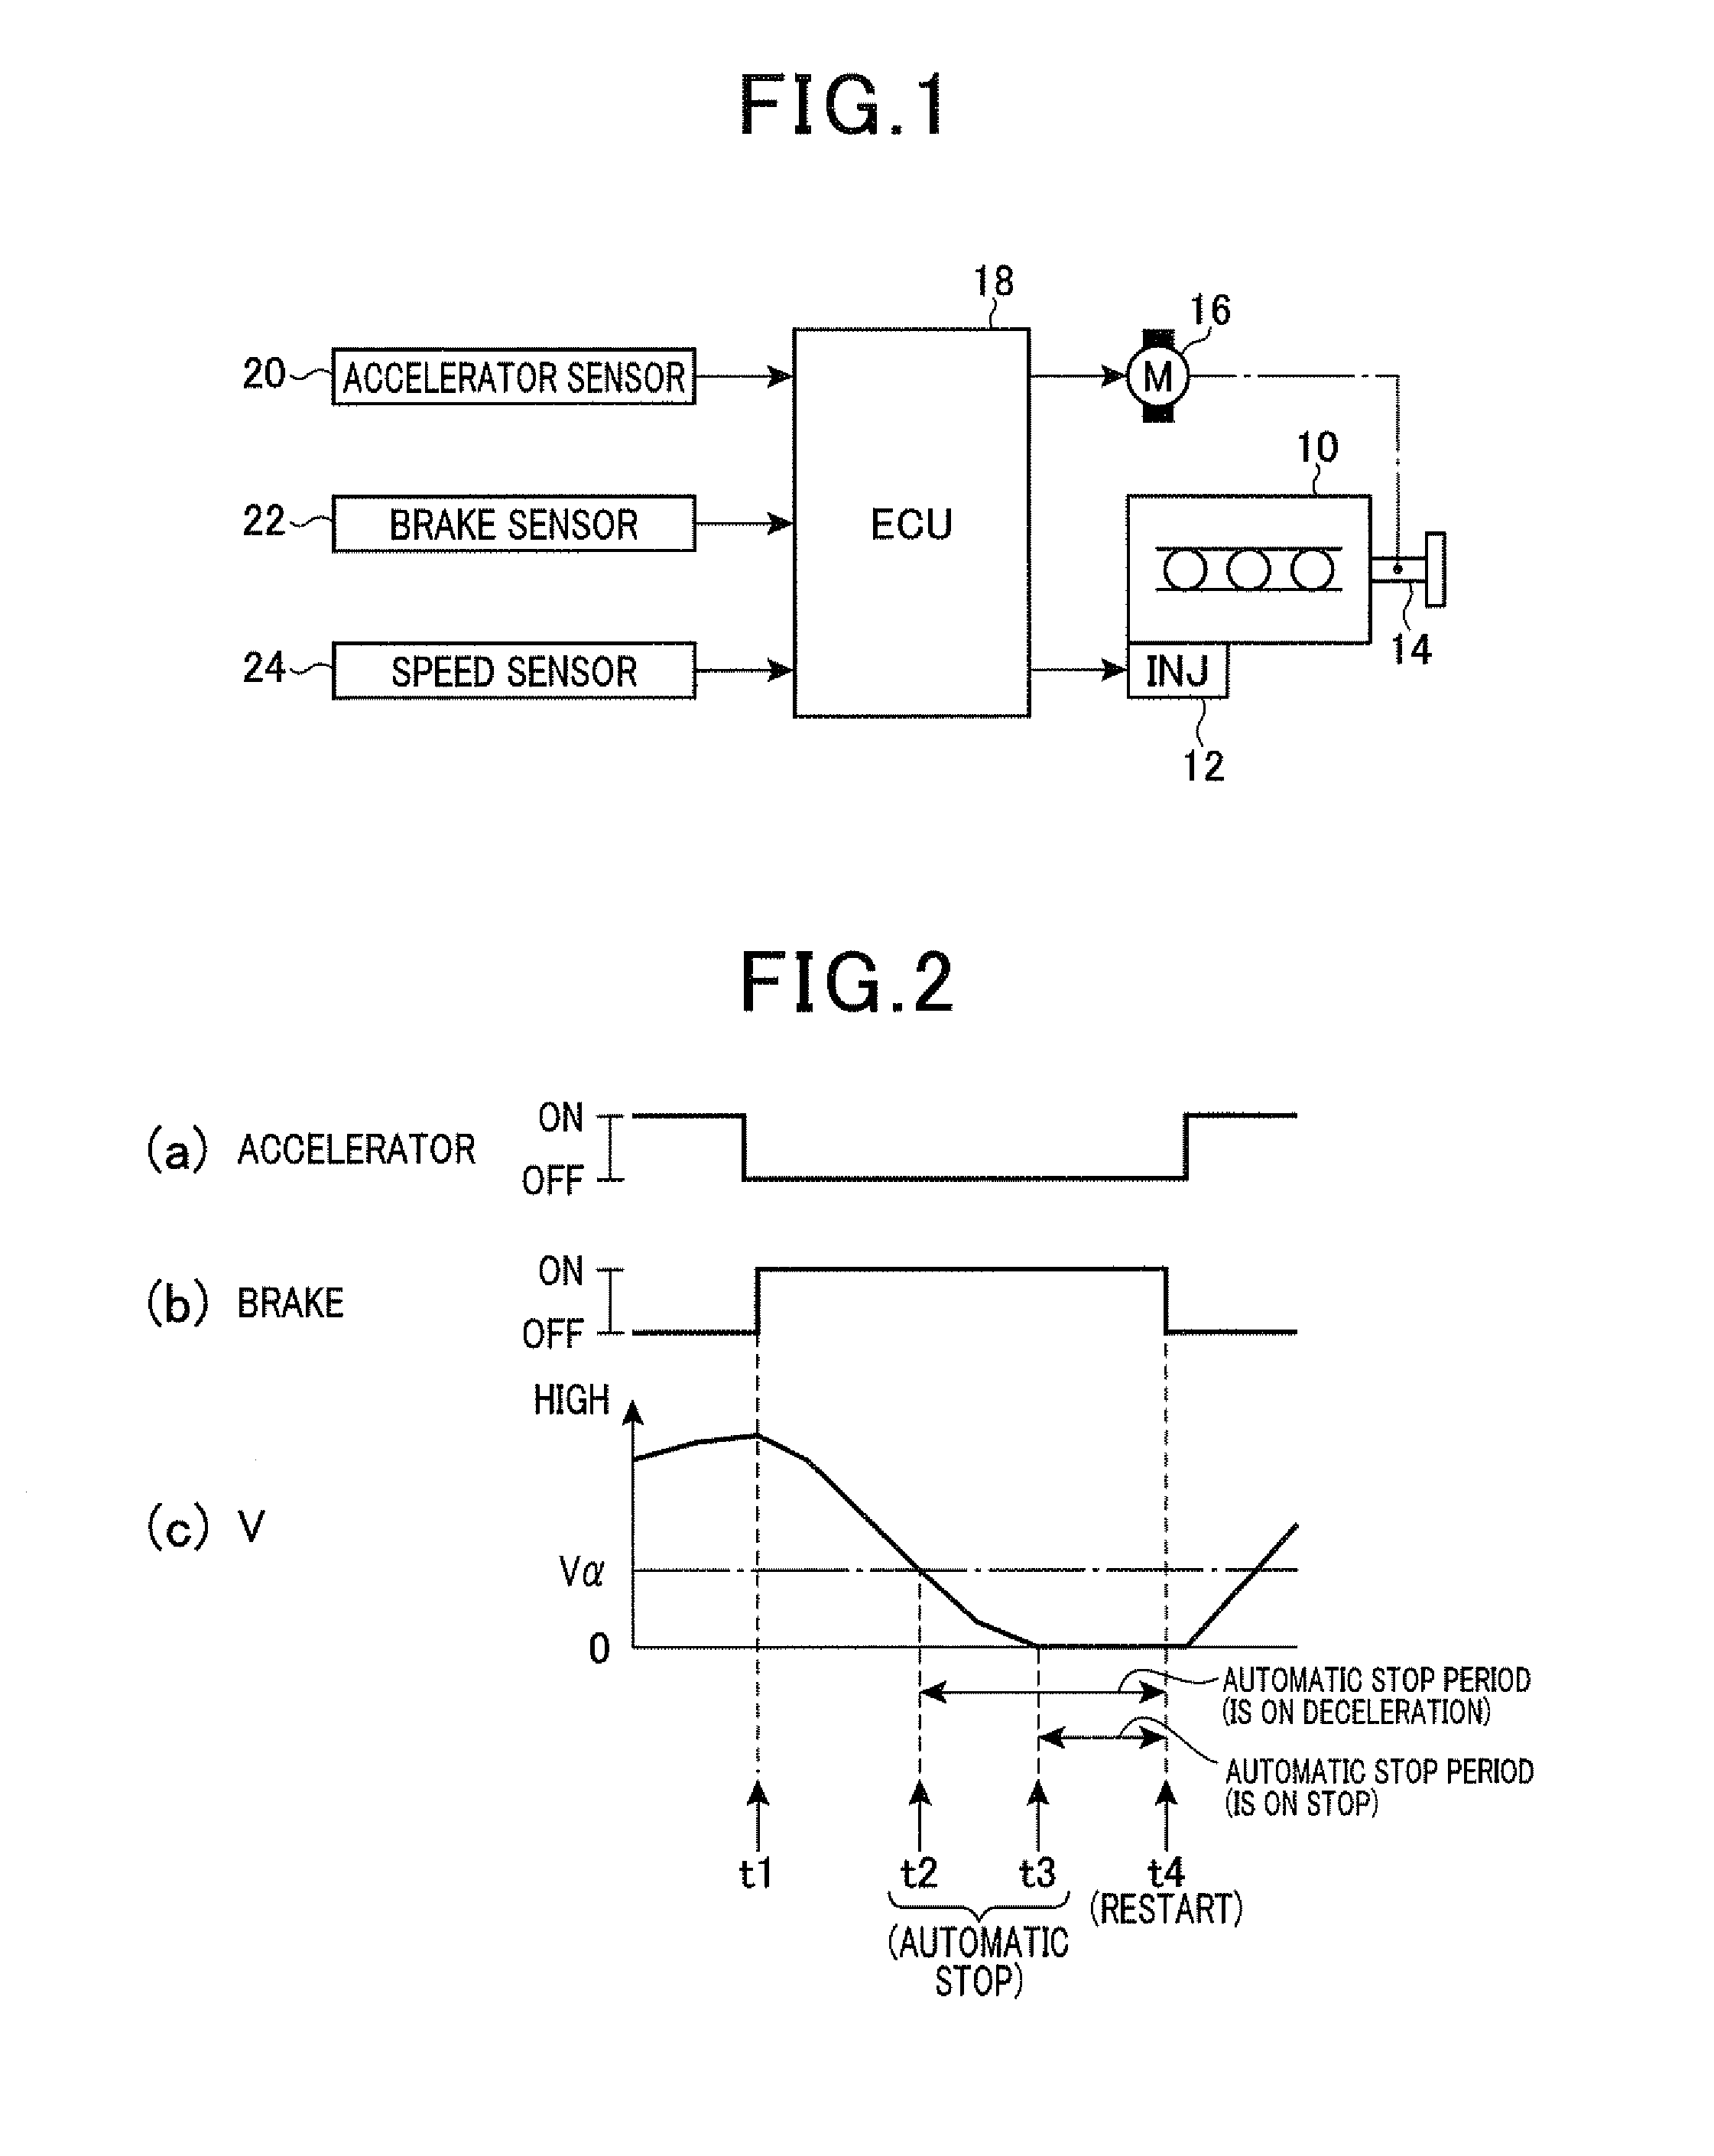 Control apparatus for automatic stop of engine